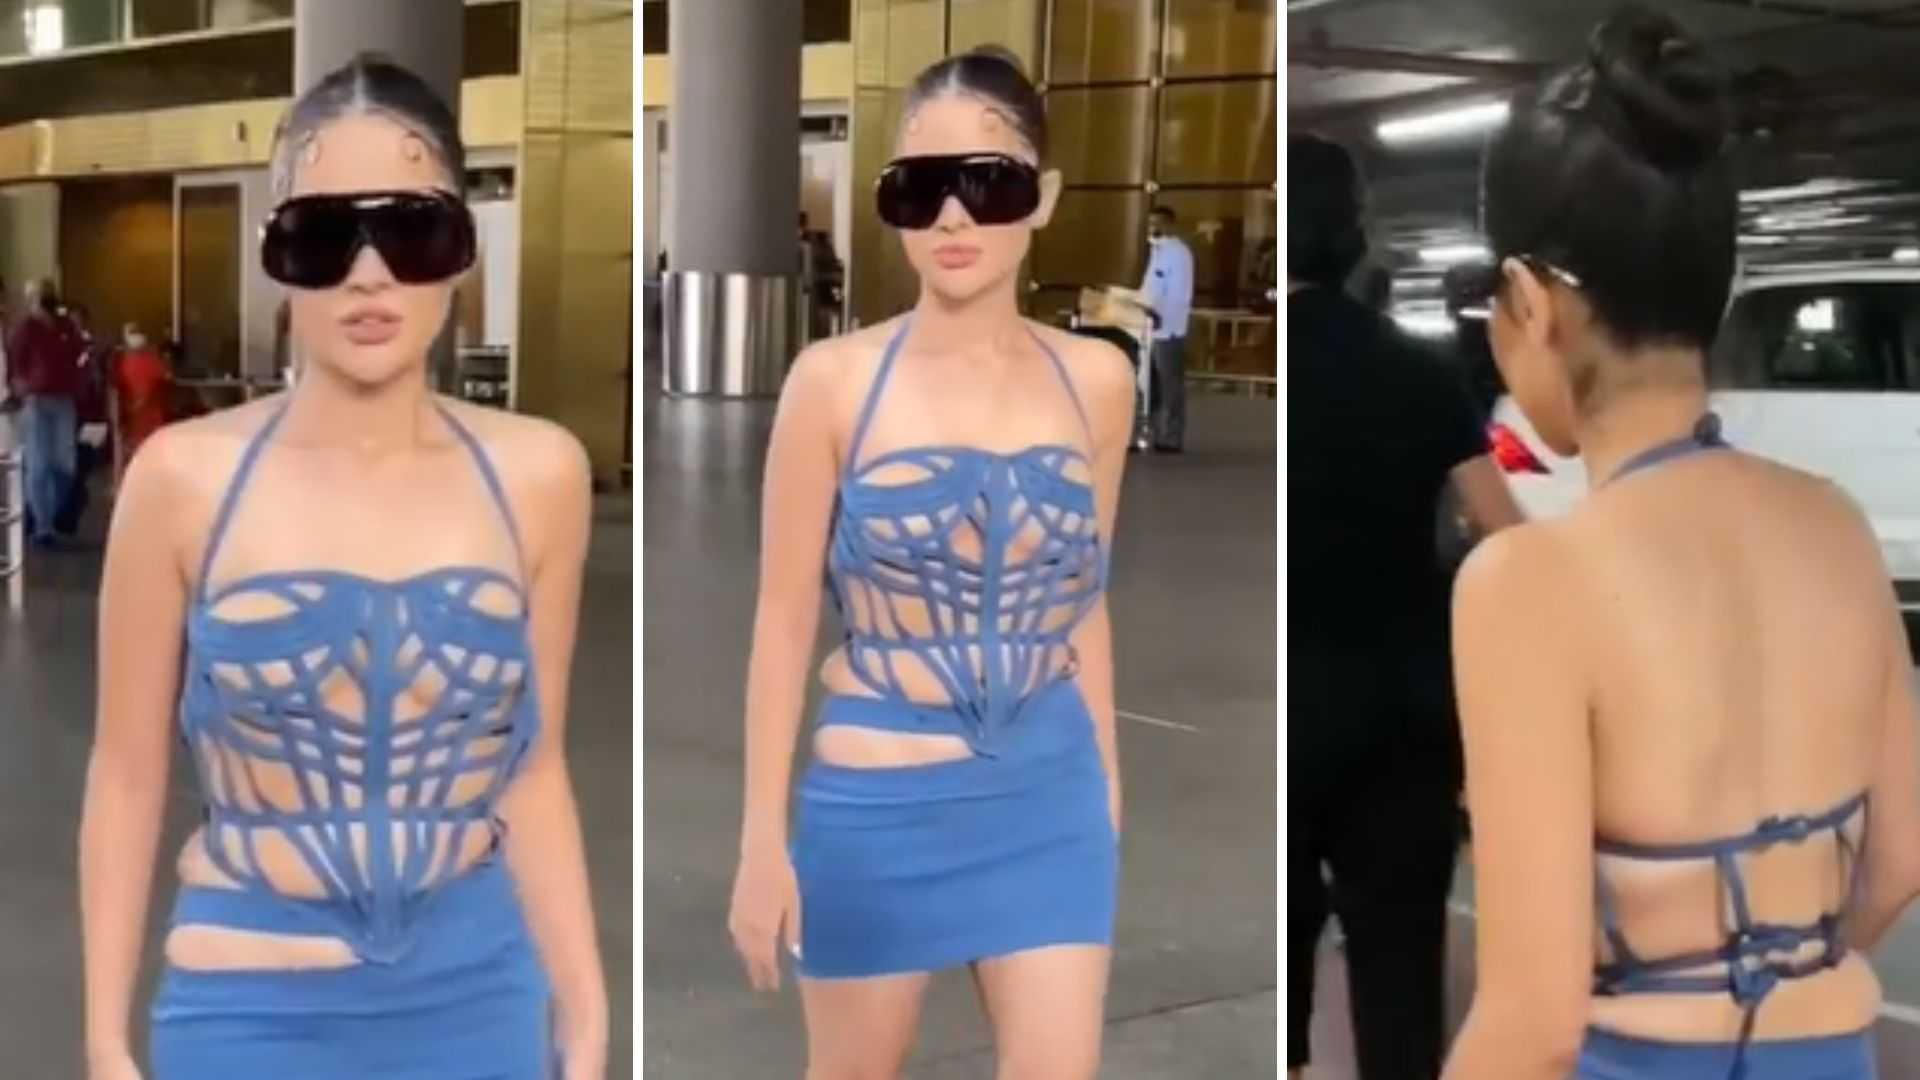 'How airports allow ladies with obscene clothes': Netizens wonder about Urfi Javed's latest outfit at airport